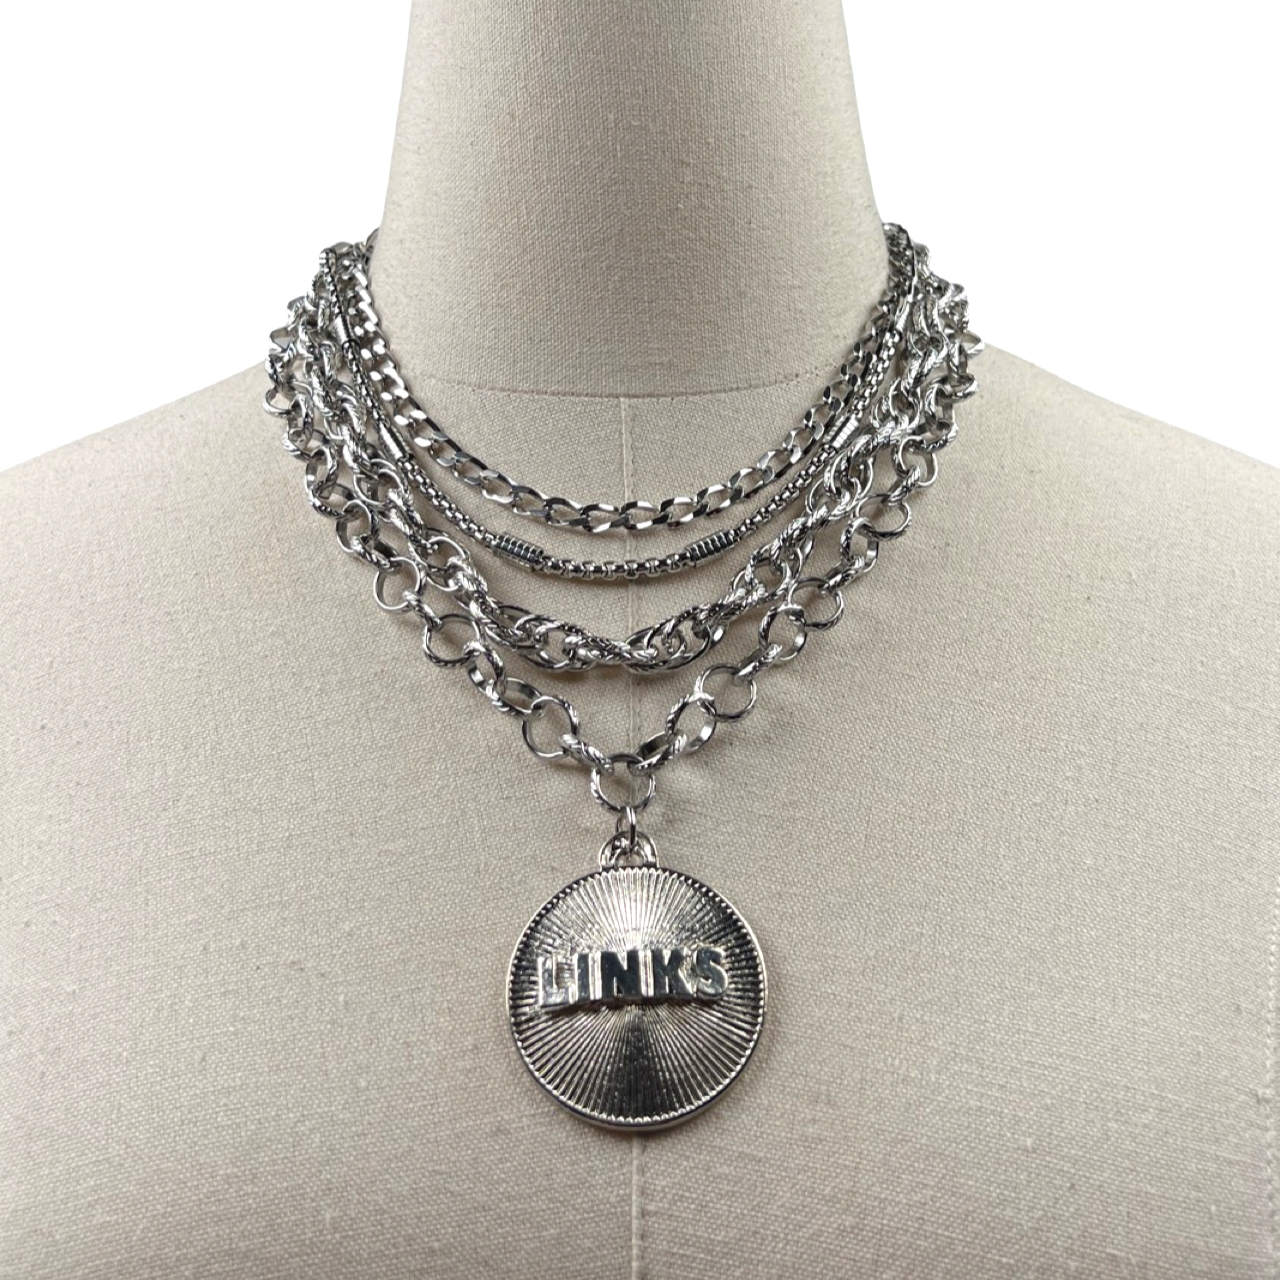 Links Classic Beat Necklace LINKS Necklaces Cerese D, Inc. Radiant Silver 